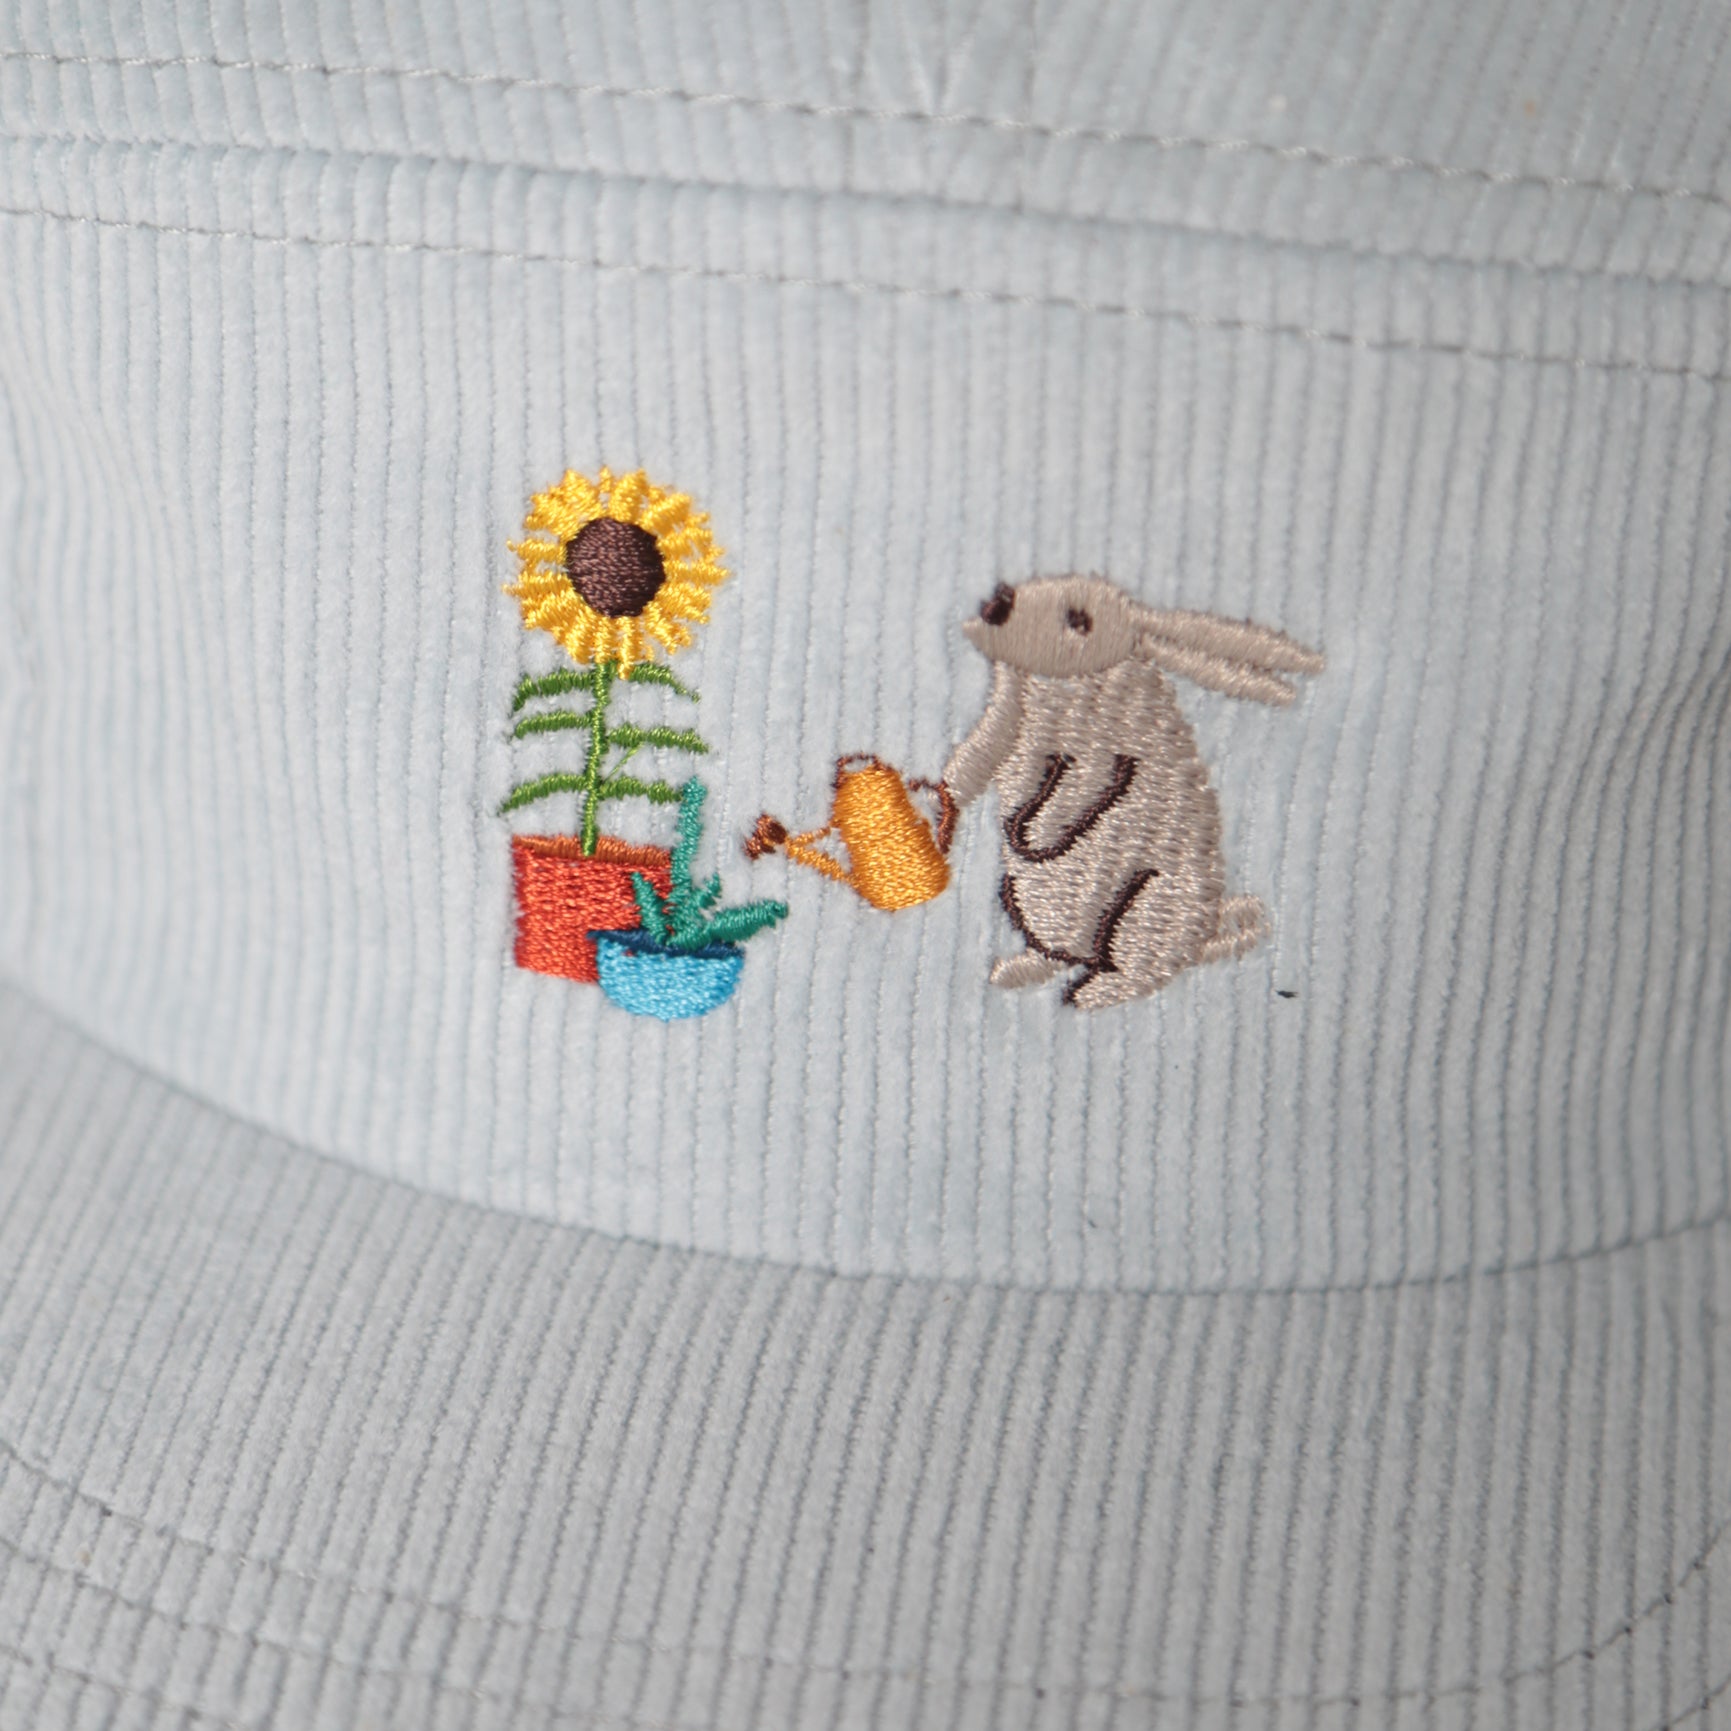 5 Panel - Powder Cord - Bunny Sunflower Embroidery